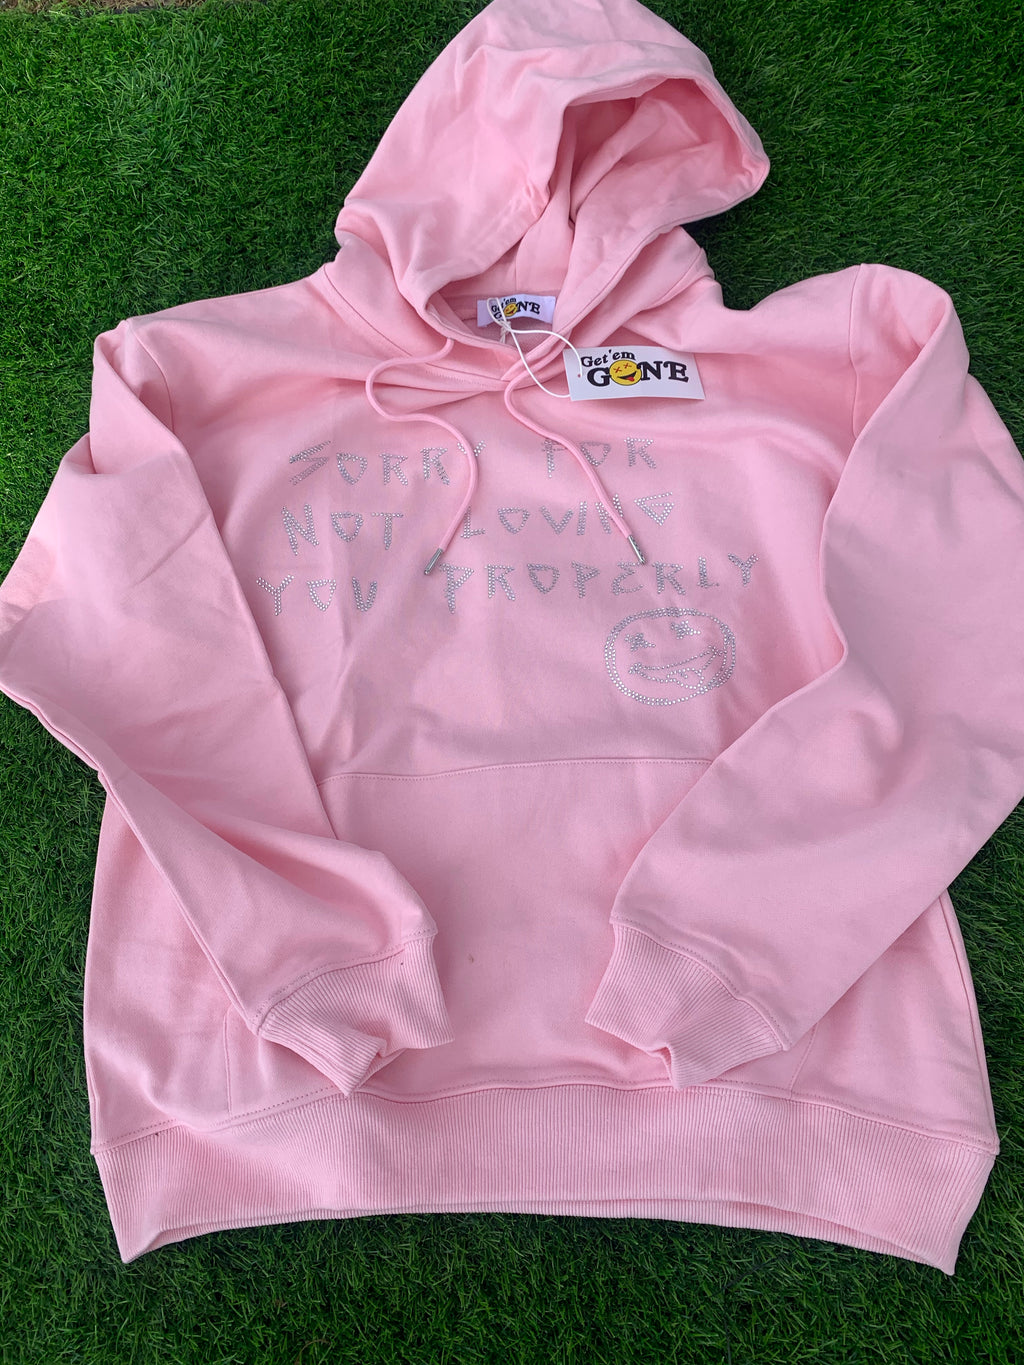 Baby Pink “Sorry For Not Loving You Properly” Rhinestone Hoodie